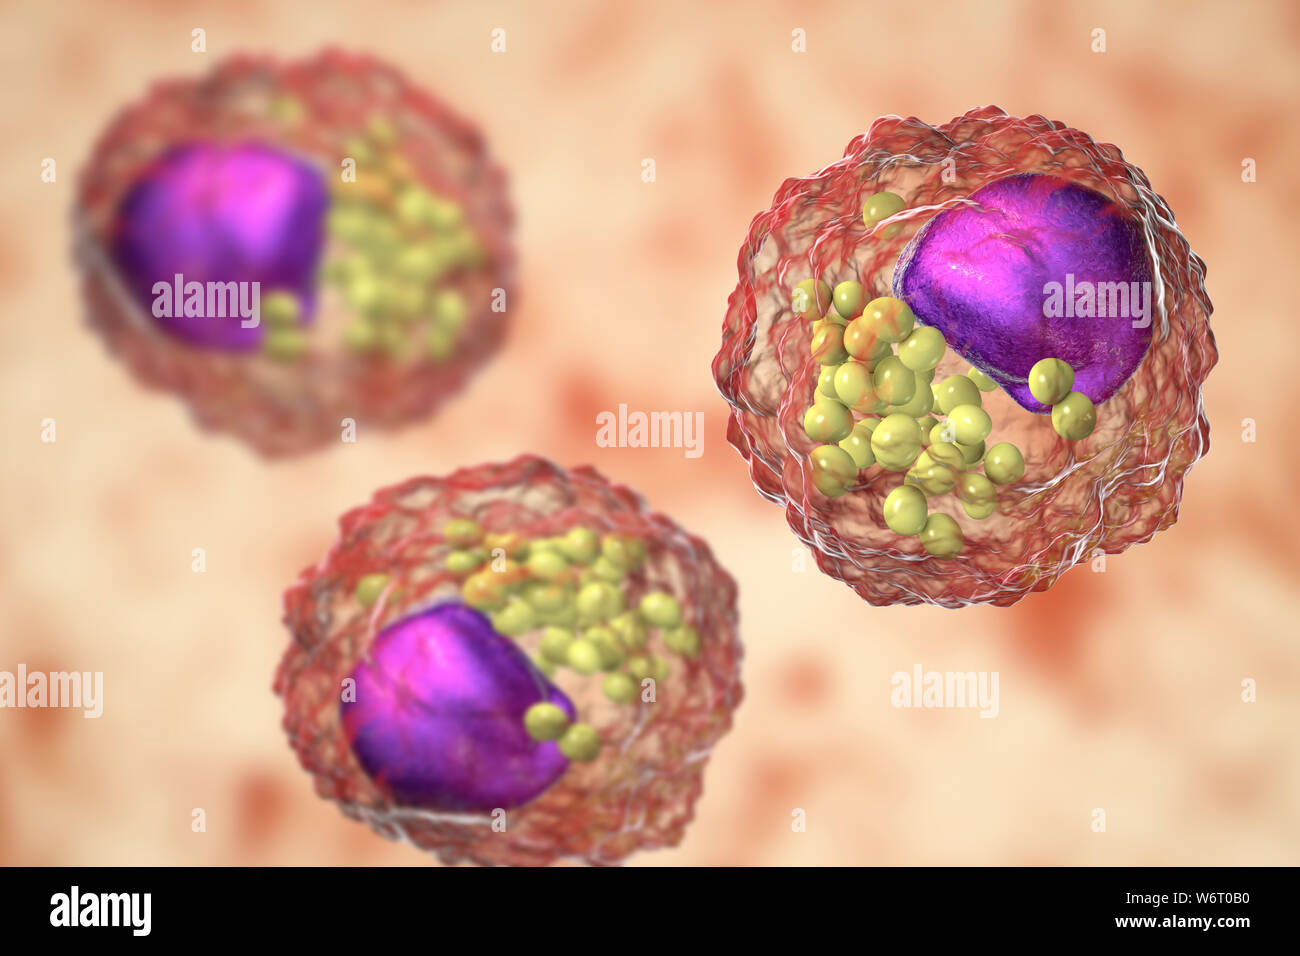 Macrophage foam cell, illustration. Foam cells are macrophage cells that contain lipid droplets and are components of atherosclerotic plaque. Stock Photo